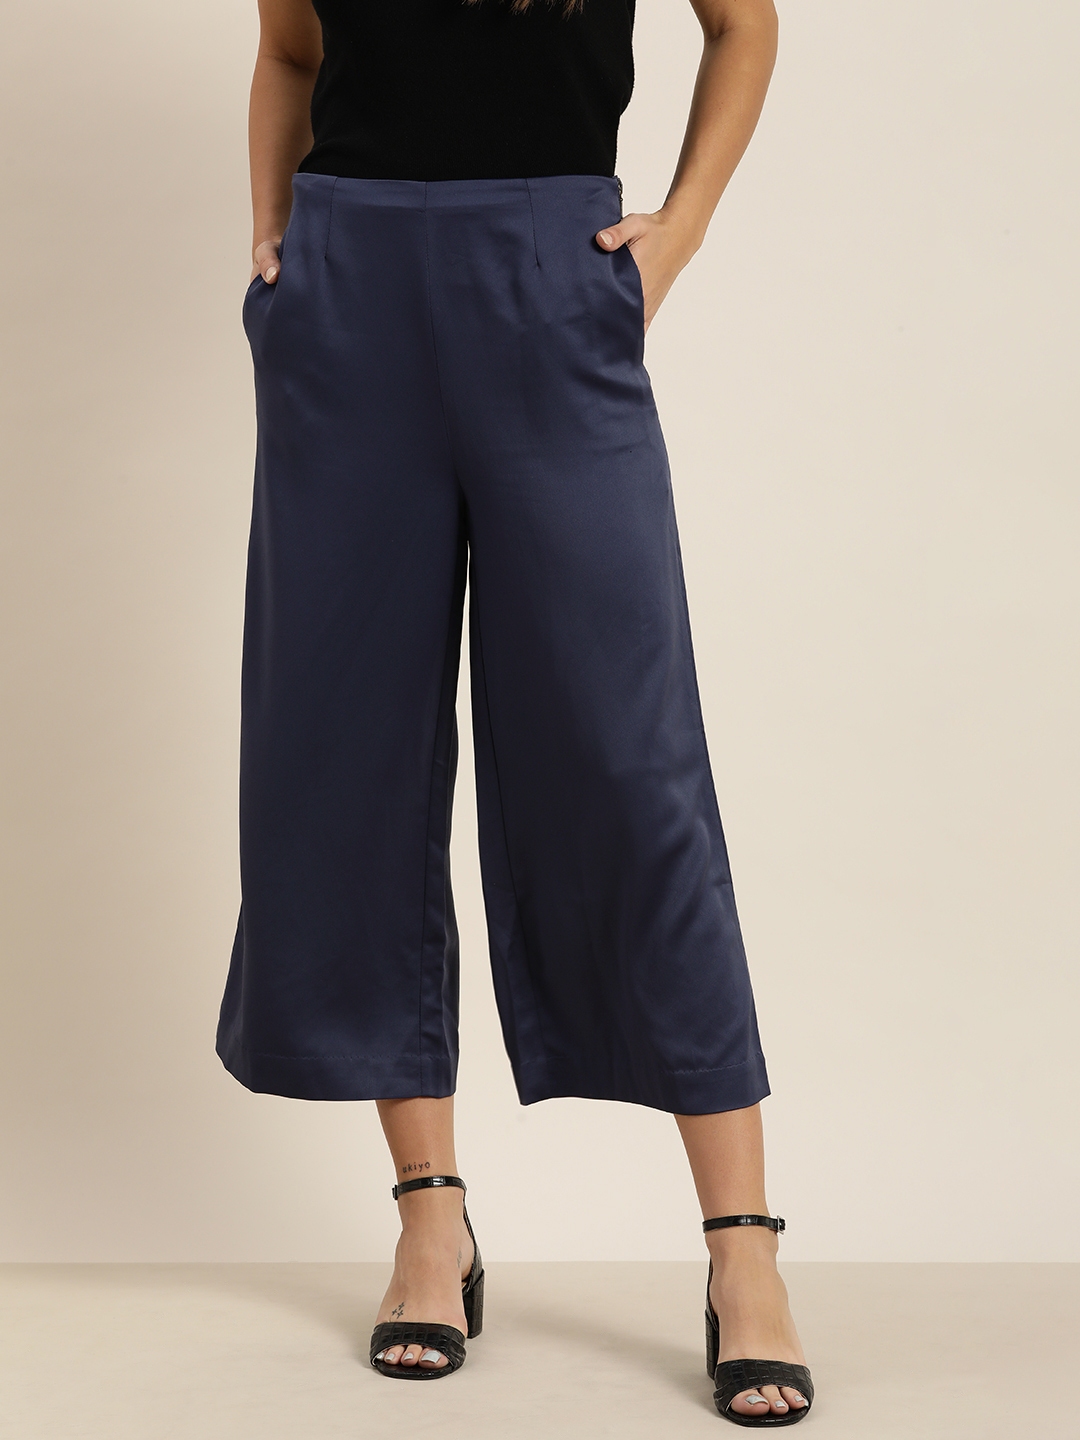 Buy Her By Invictus Women Navy Blue Regular Fit Solid Culottes ...